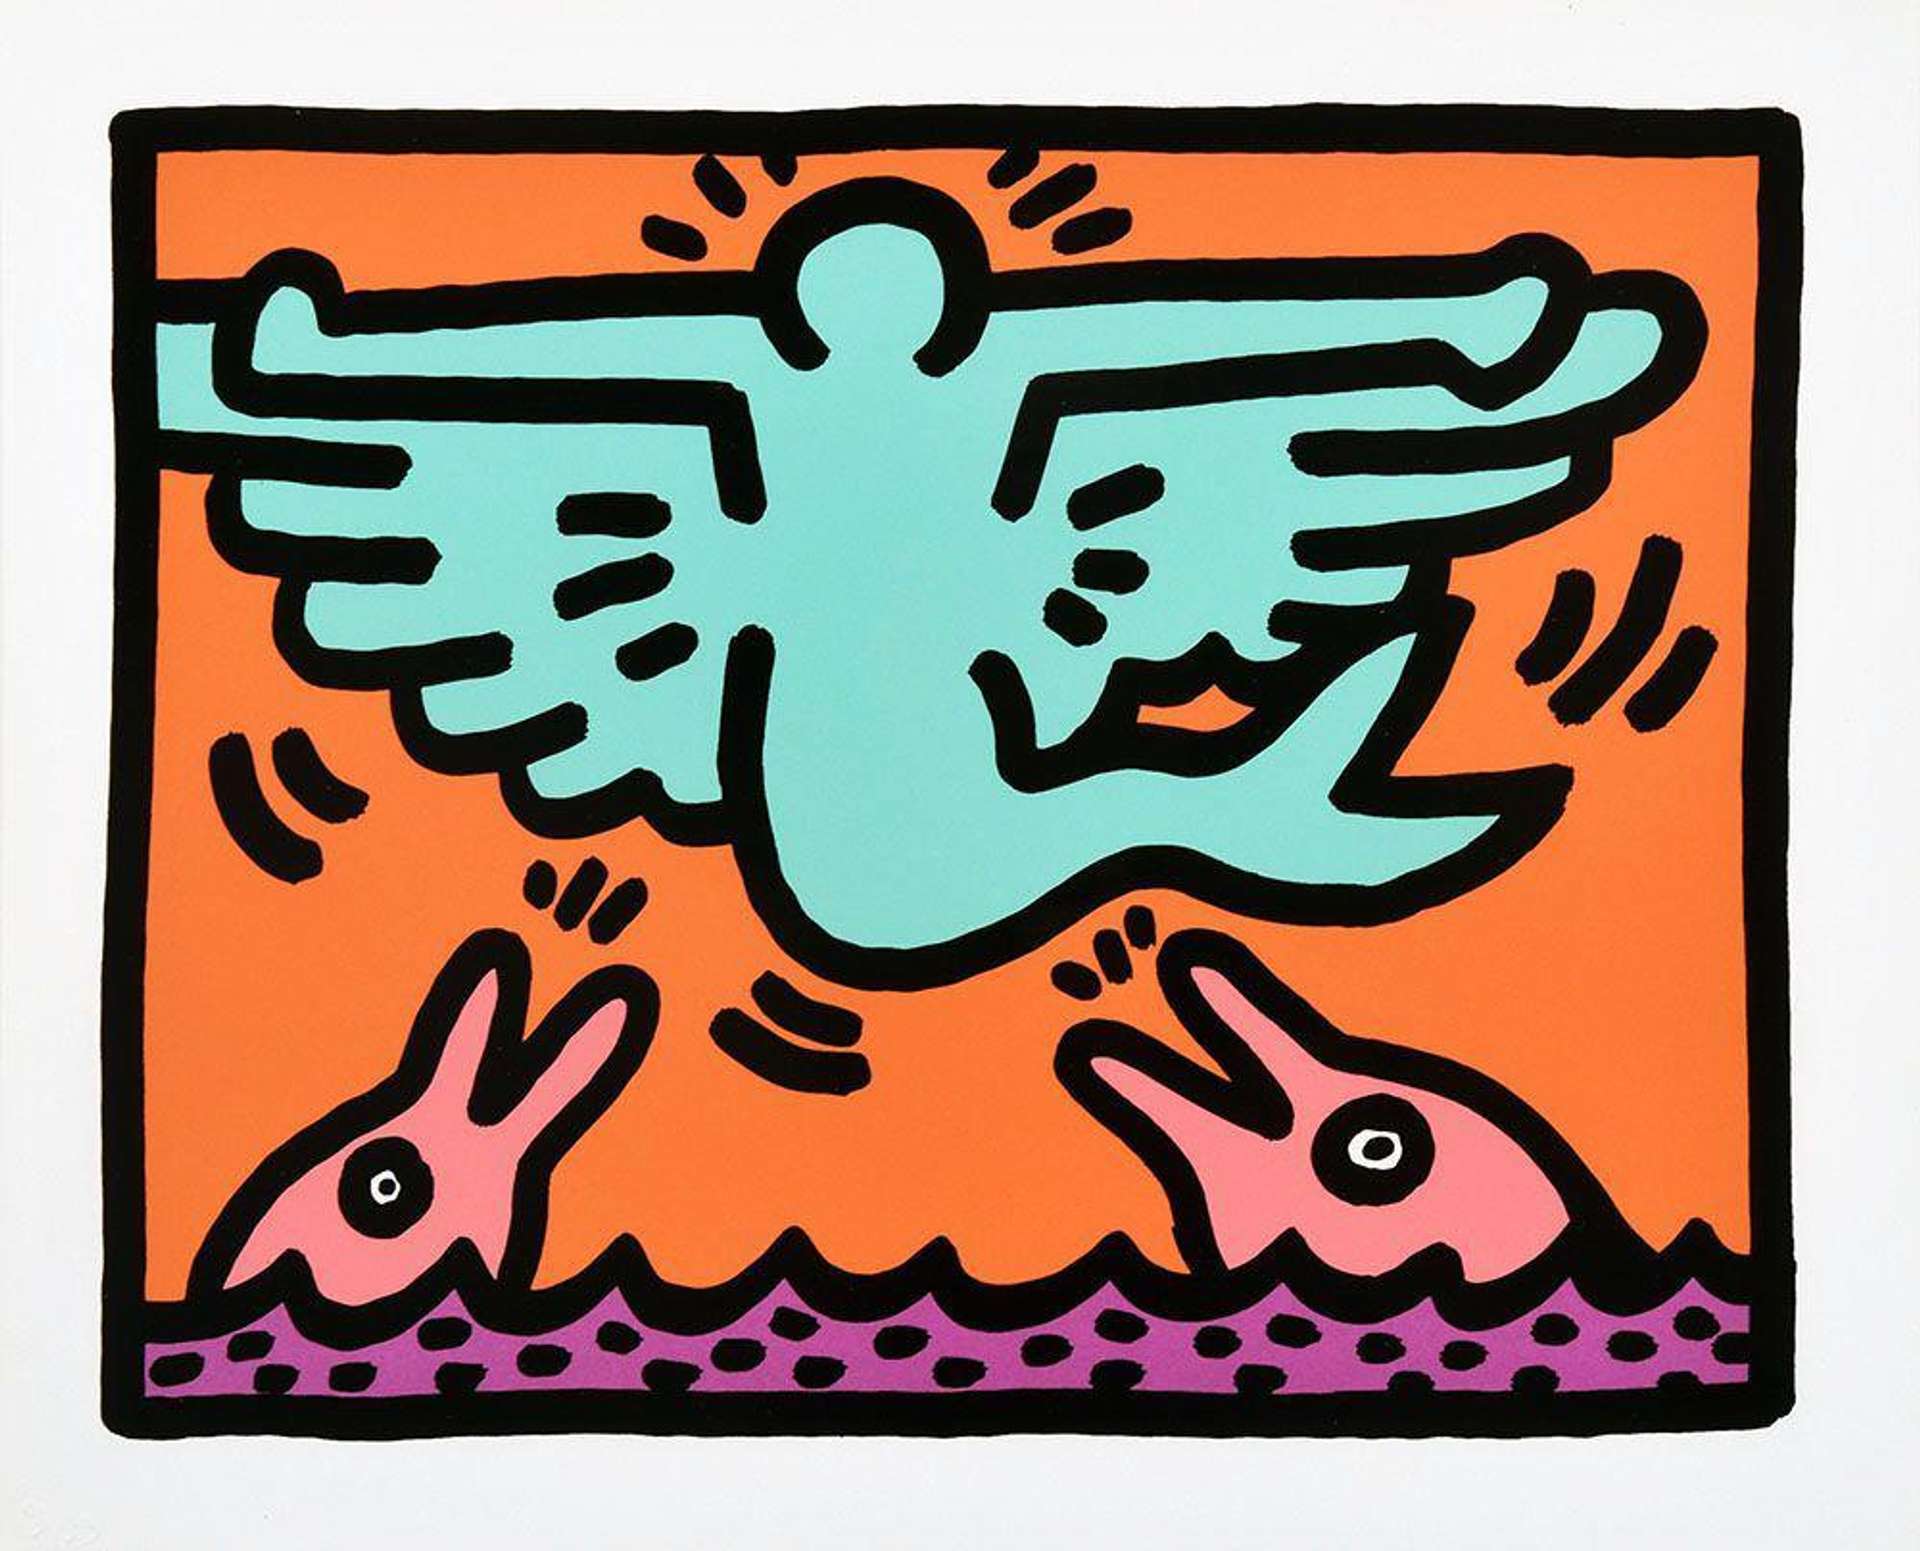 Here, swimming dolphins, walking dolphins, androgynous figures and a winged angel play out a joyful scene over four boxes in a style that is reminiscent of comics or cartoons. Boldly outlined in black, the figures recall Haring’s beginnings in street art and his earliest ‘subway drawings’ that made his name while he was still a student.